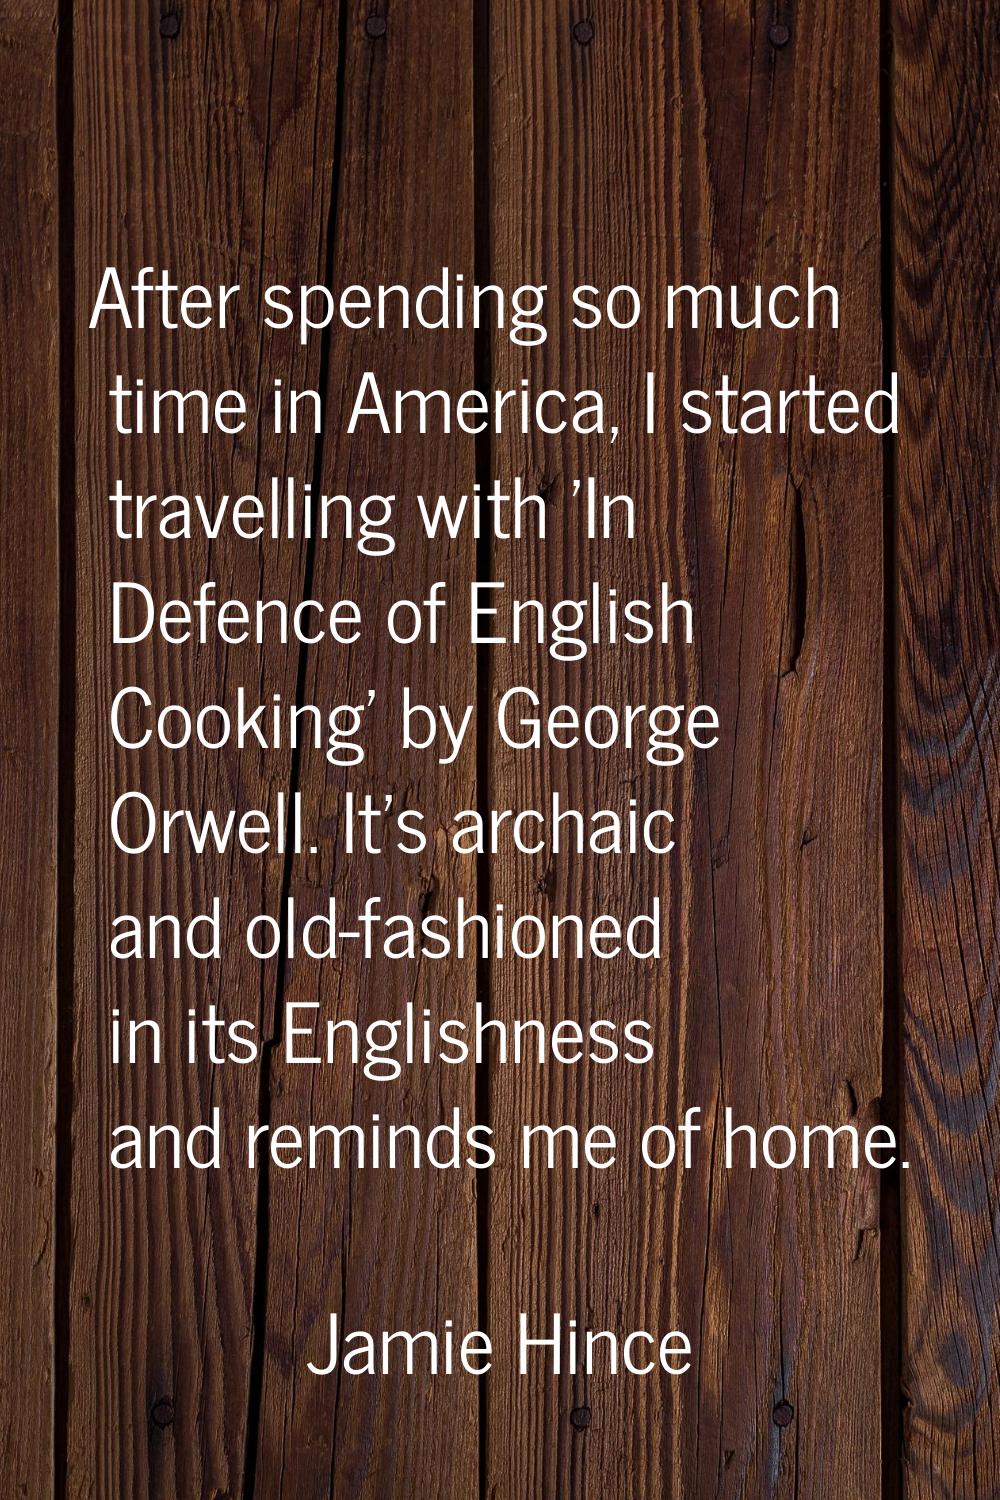 After spending so much time in America, I started travelling with 'In Defence of English Cooking' b